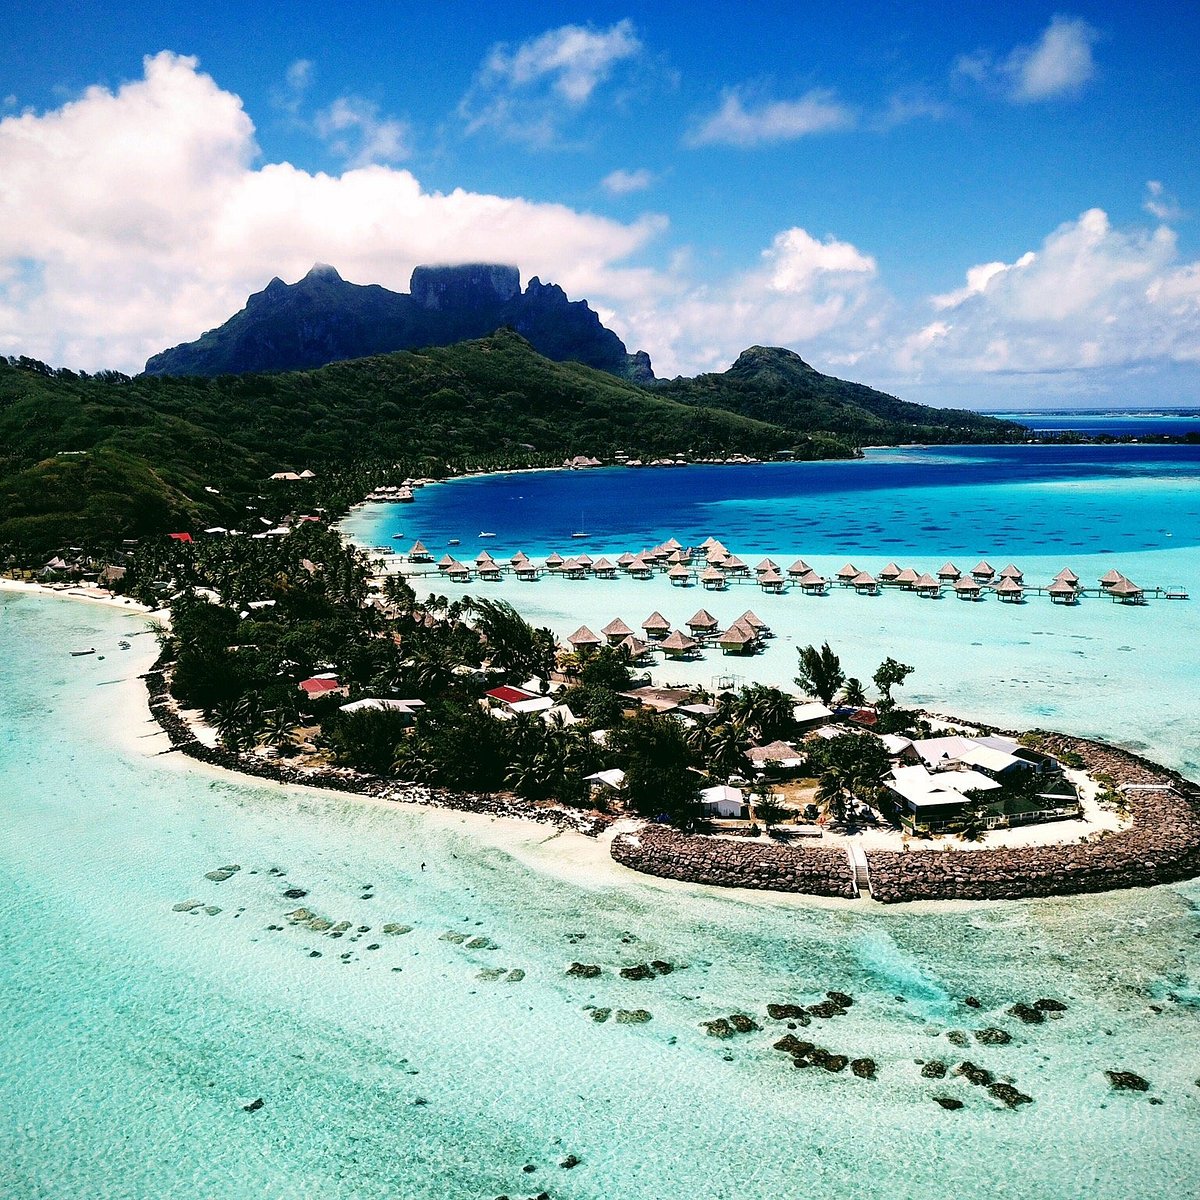 Albums 105+ Images show me pictures of bora bora Updated